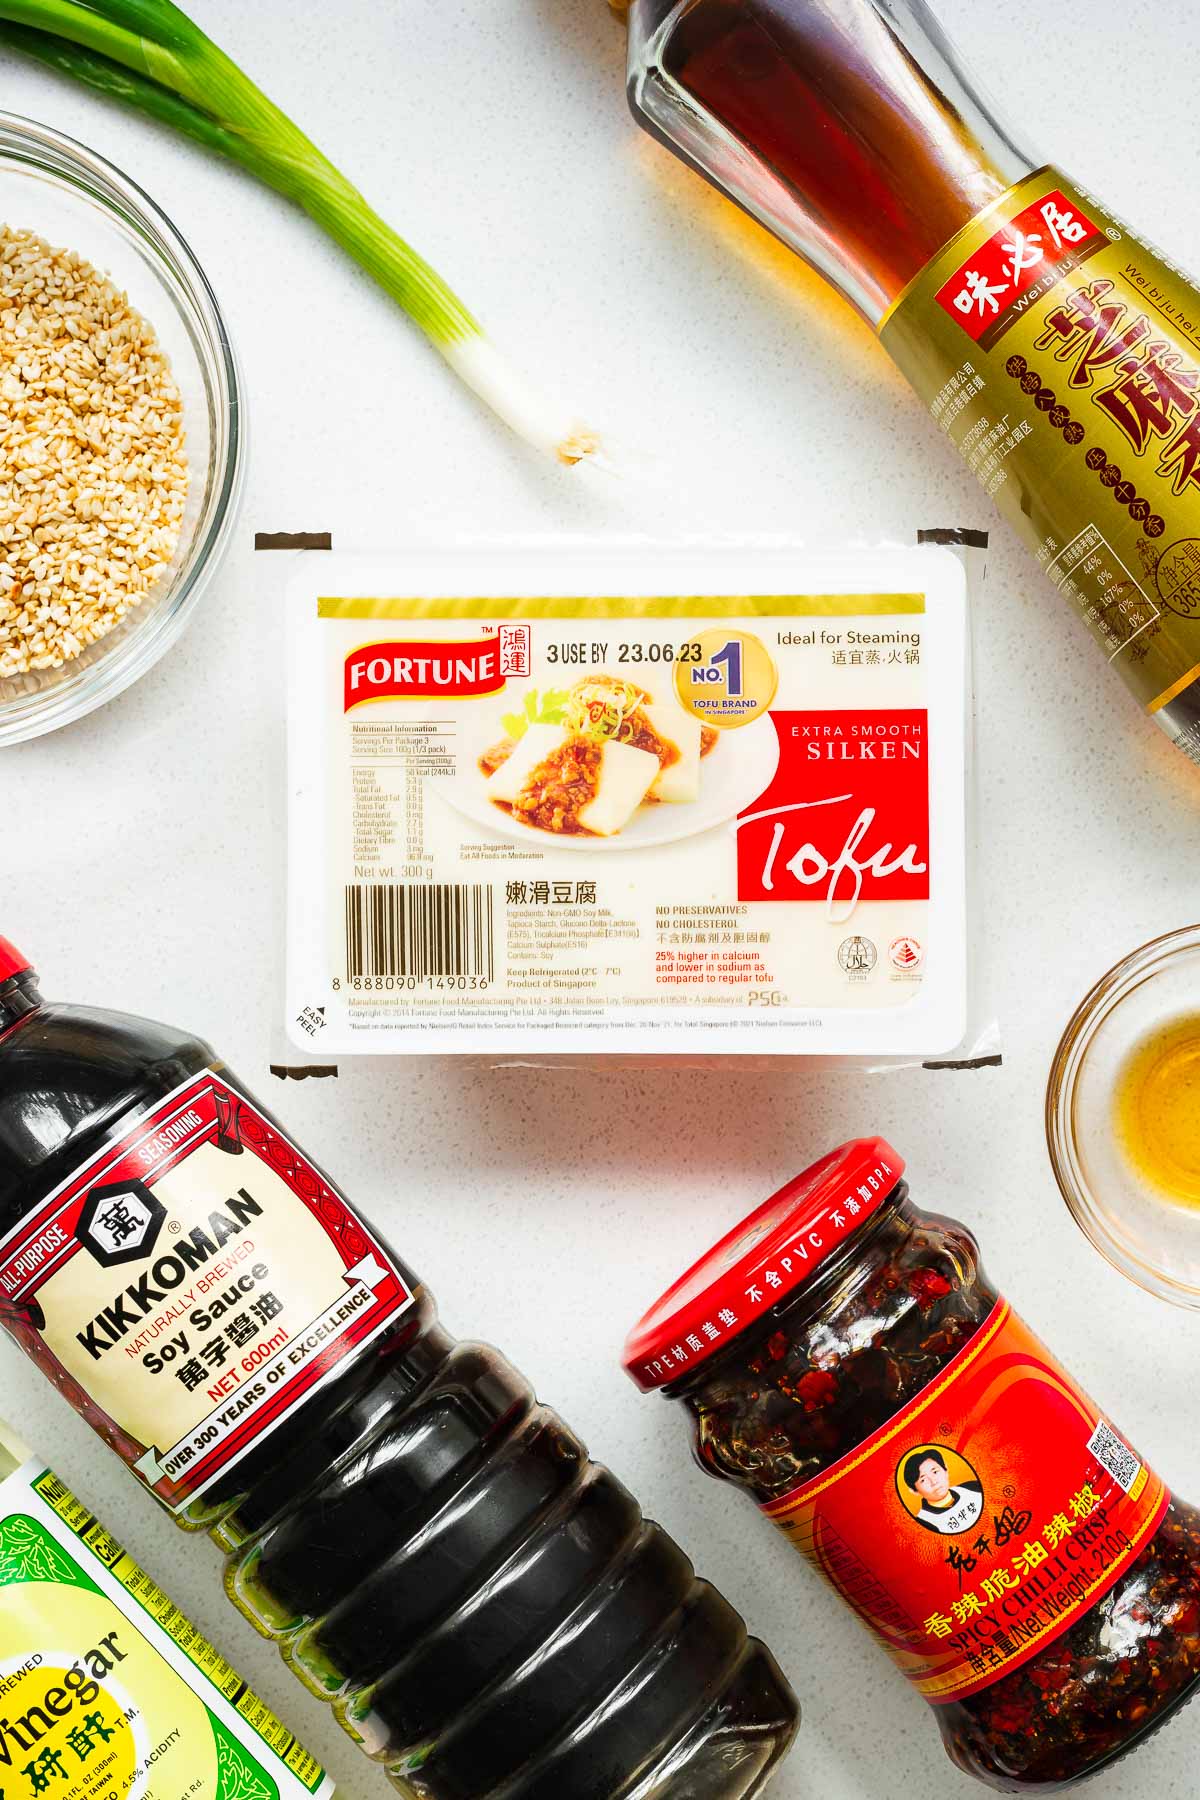 All the ingredients for a spicy soft tofu dish with silken tofu and spicy soy sauce dressing.